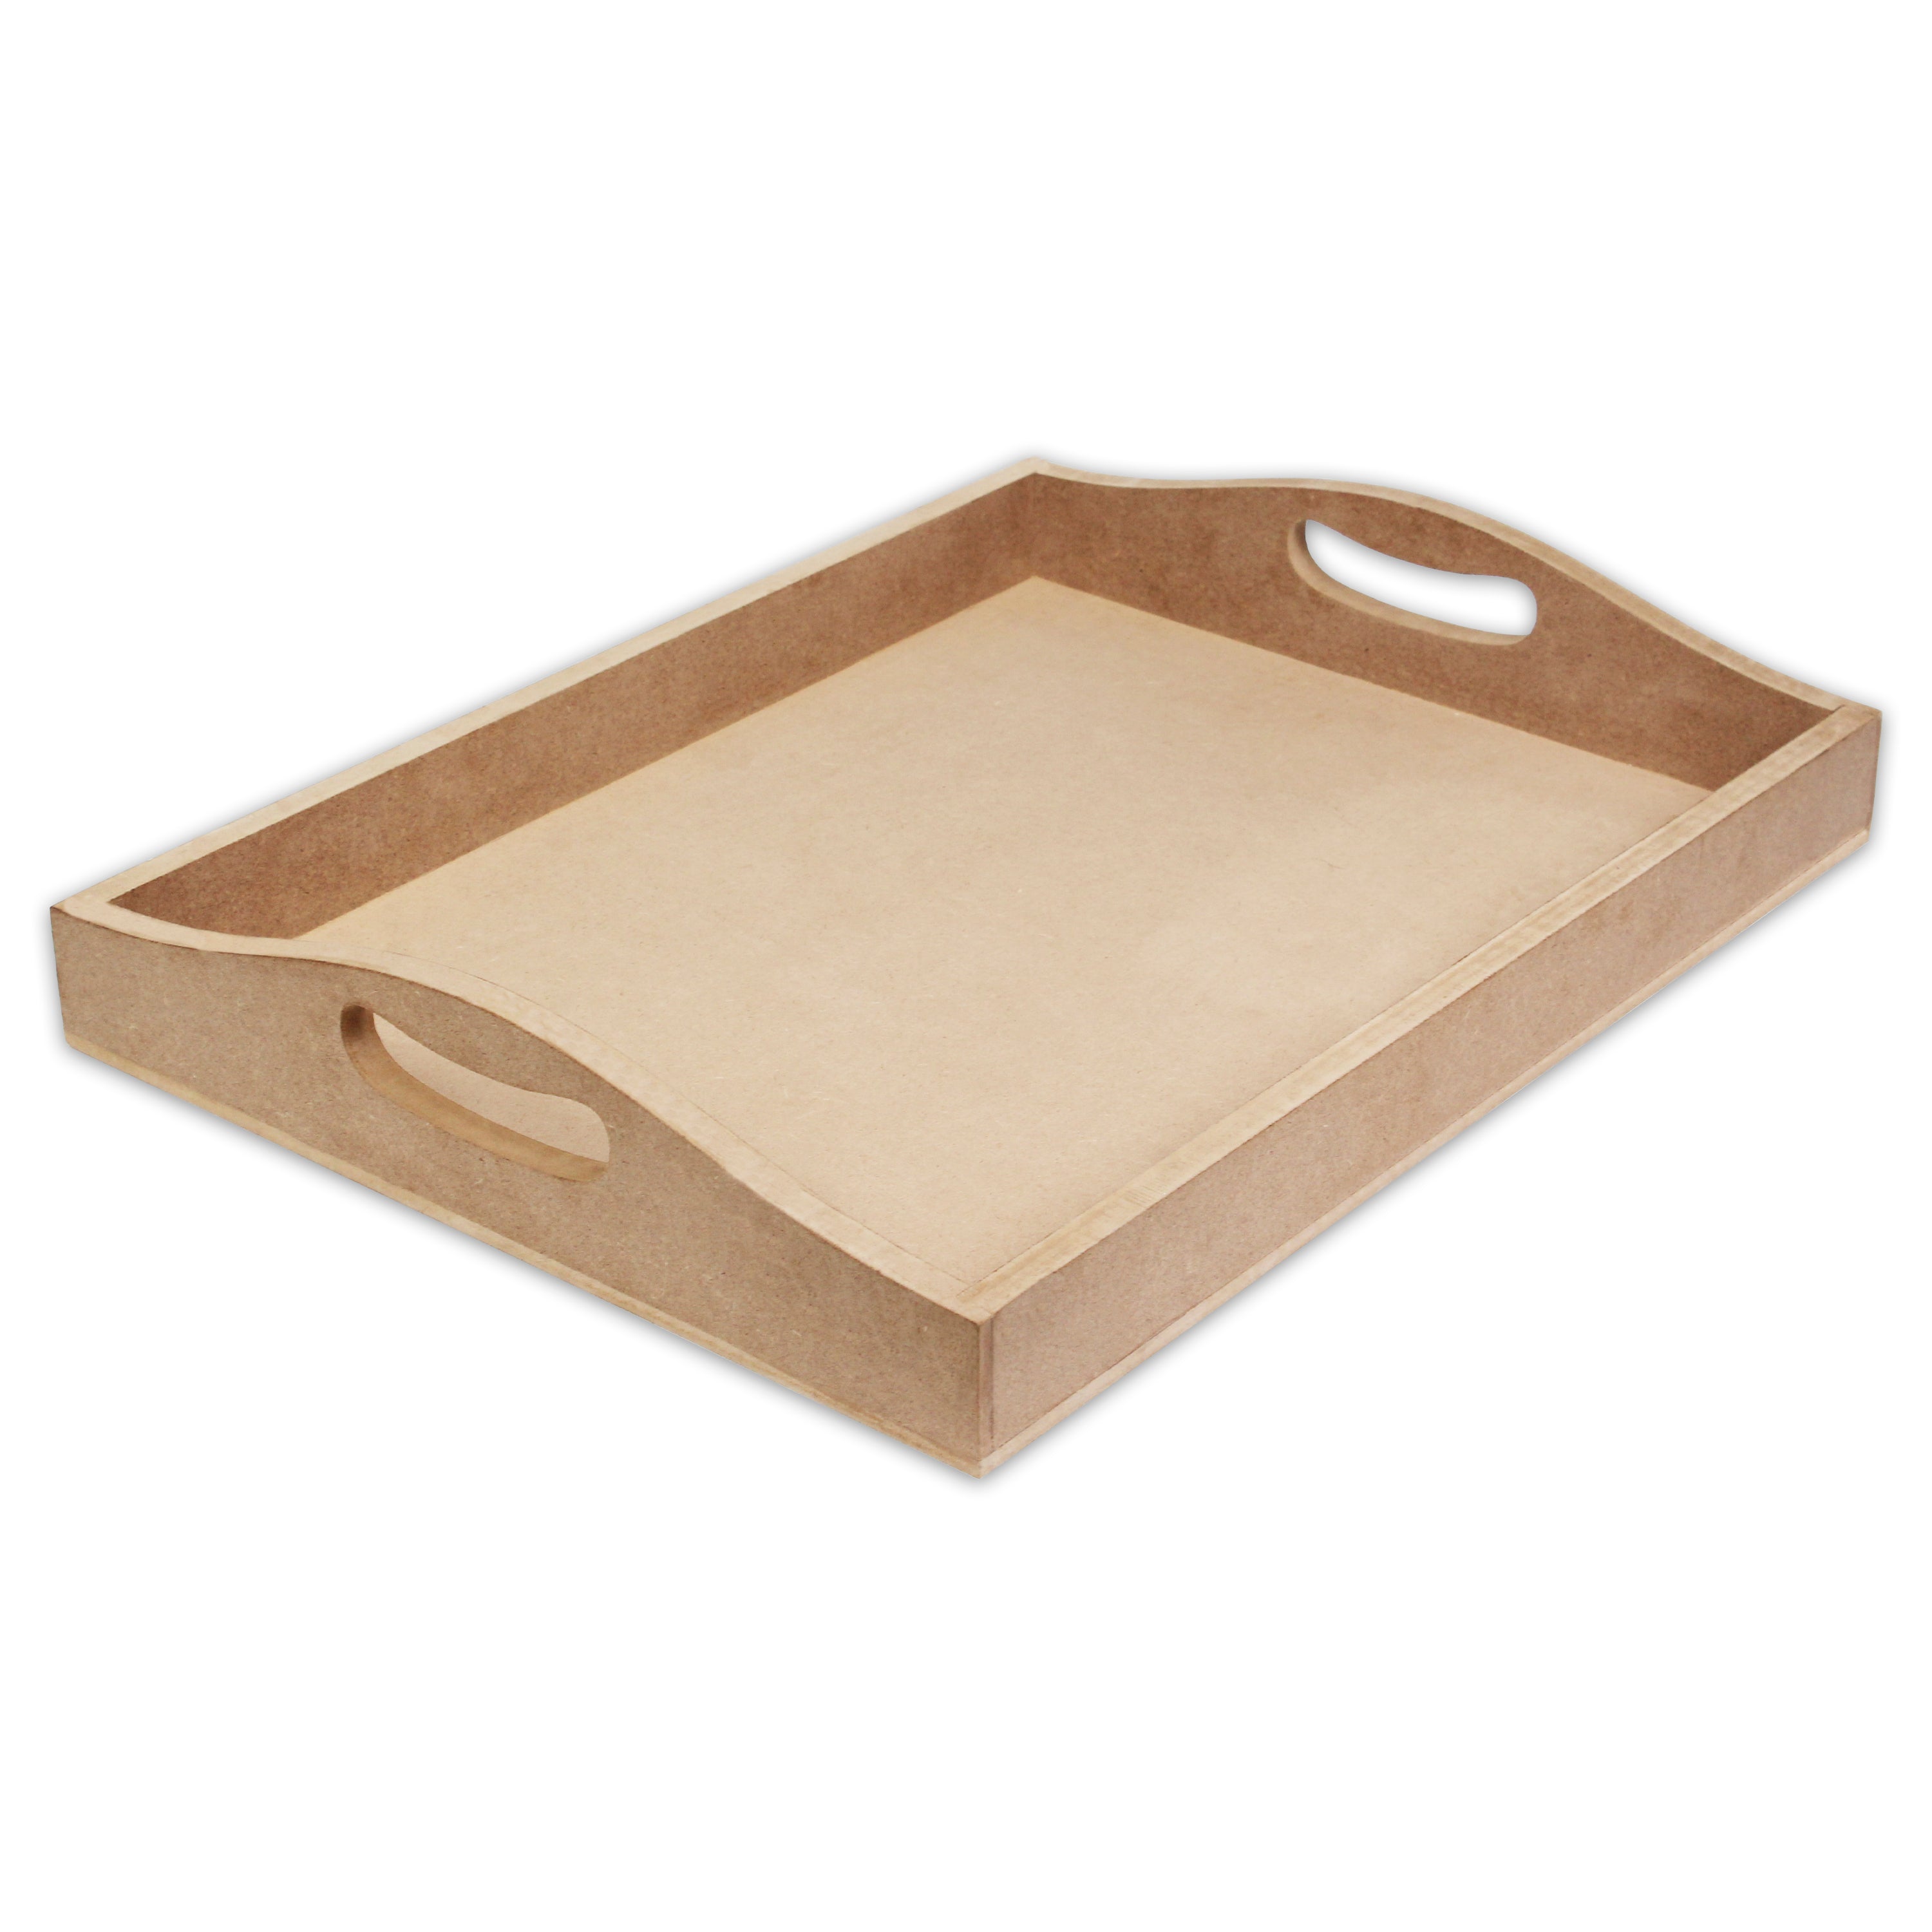 Mdf 5.5Mm Thickness Serving Tray- 14 inch X 18 inch X 3 inch